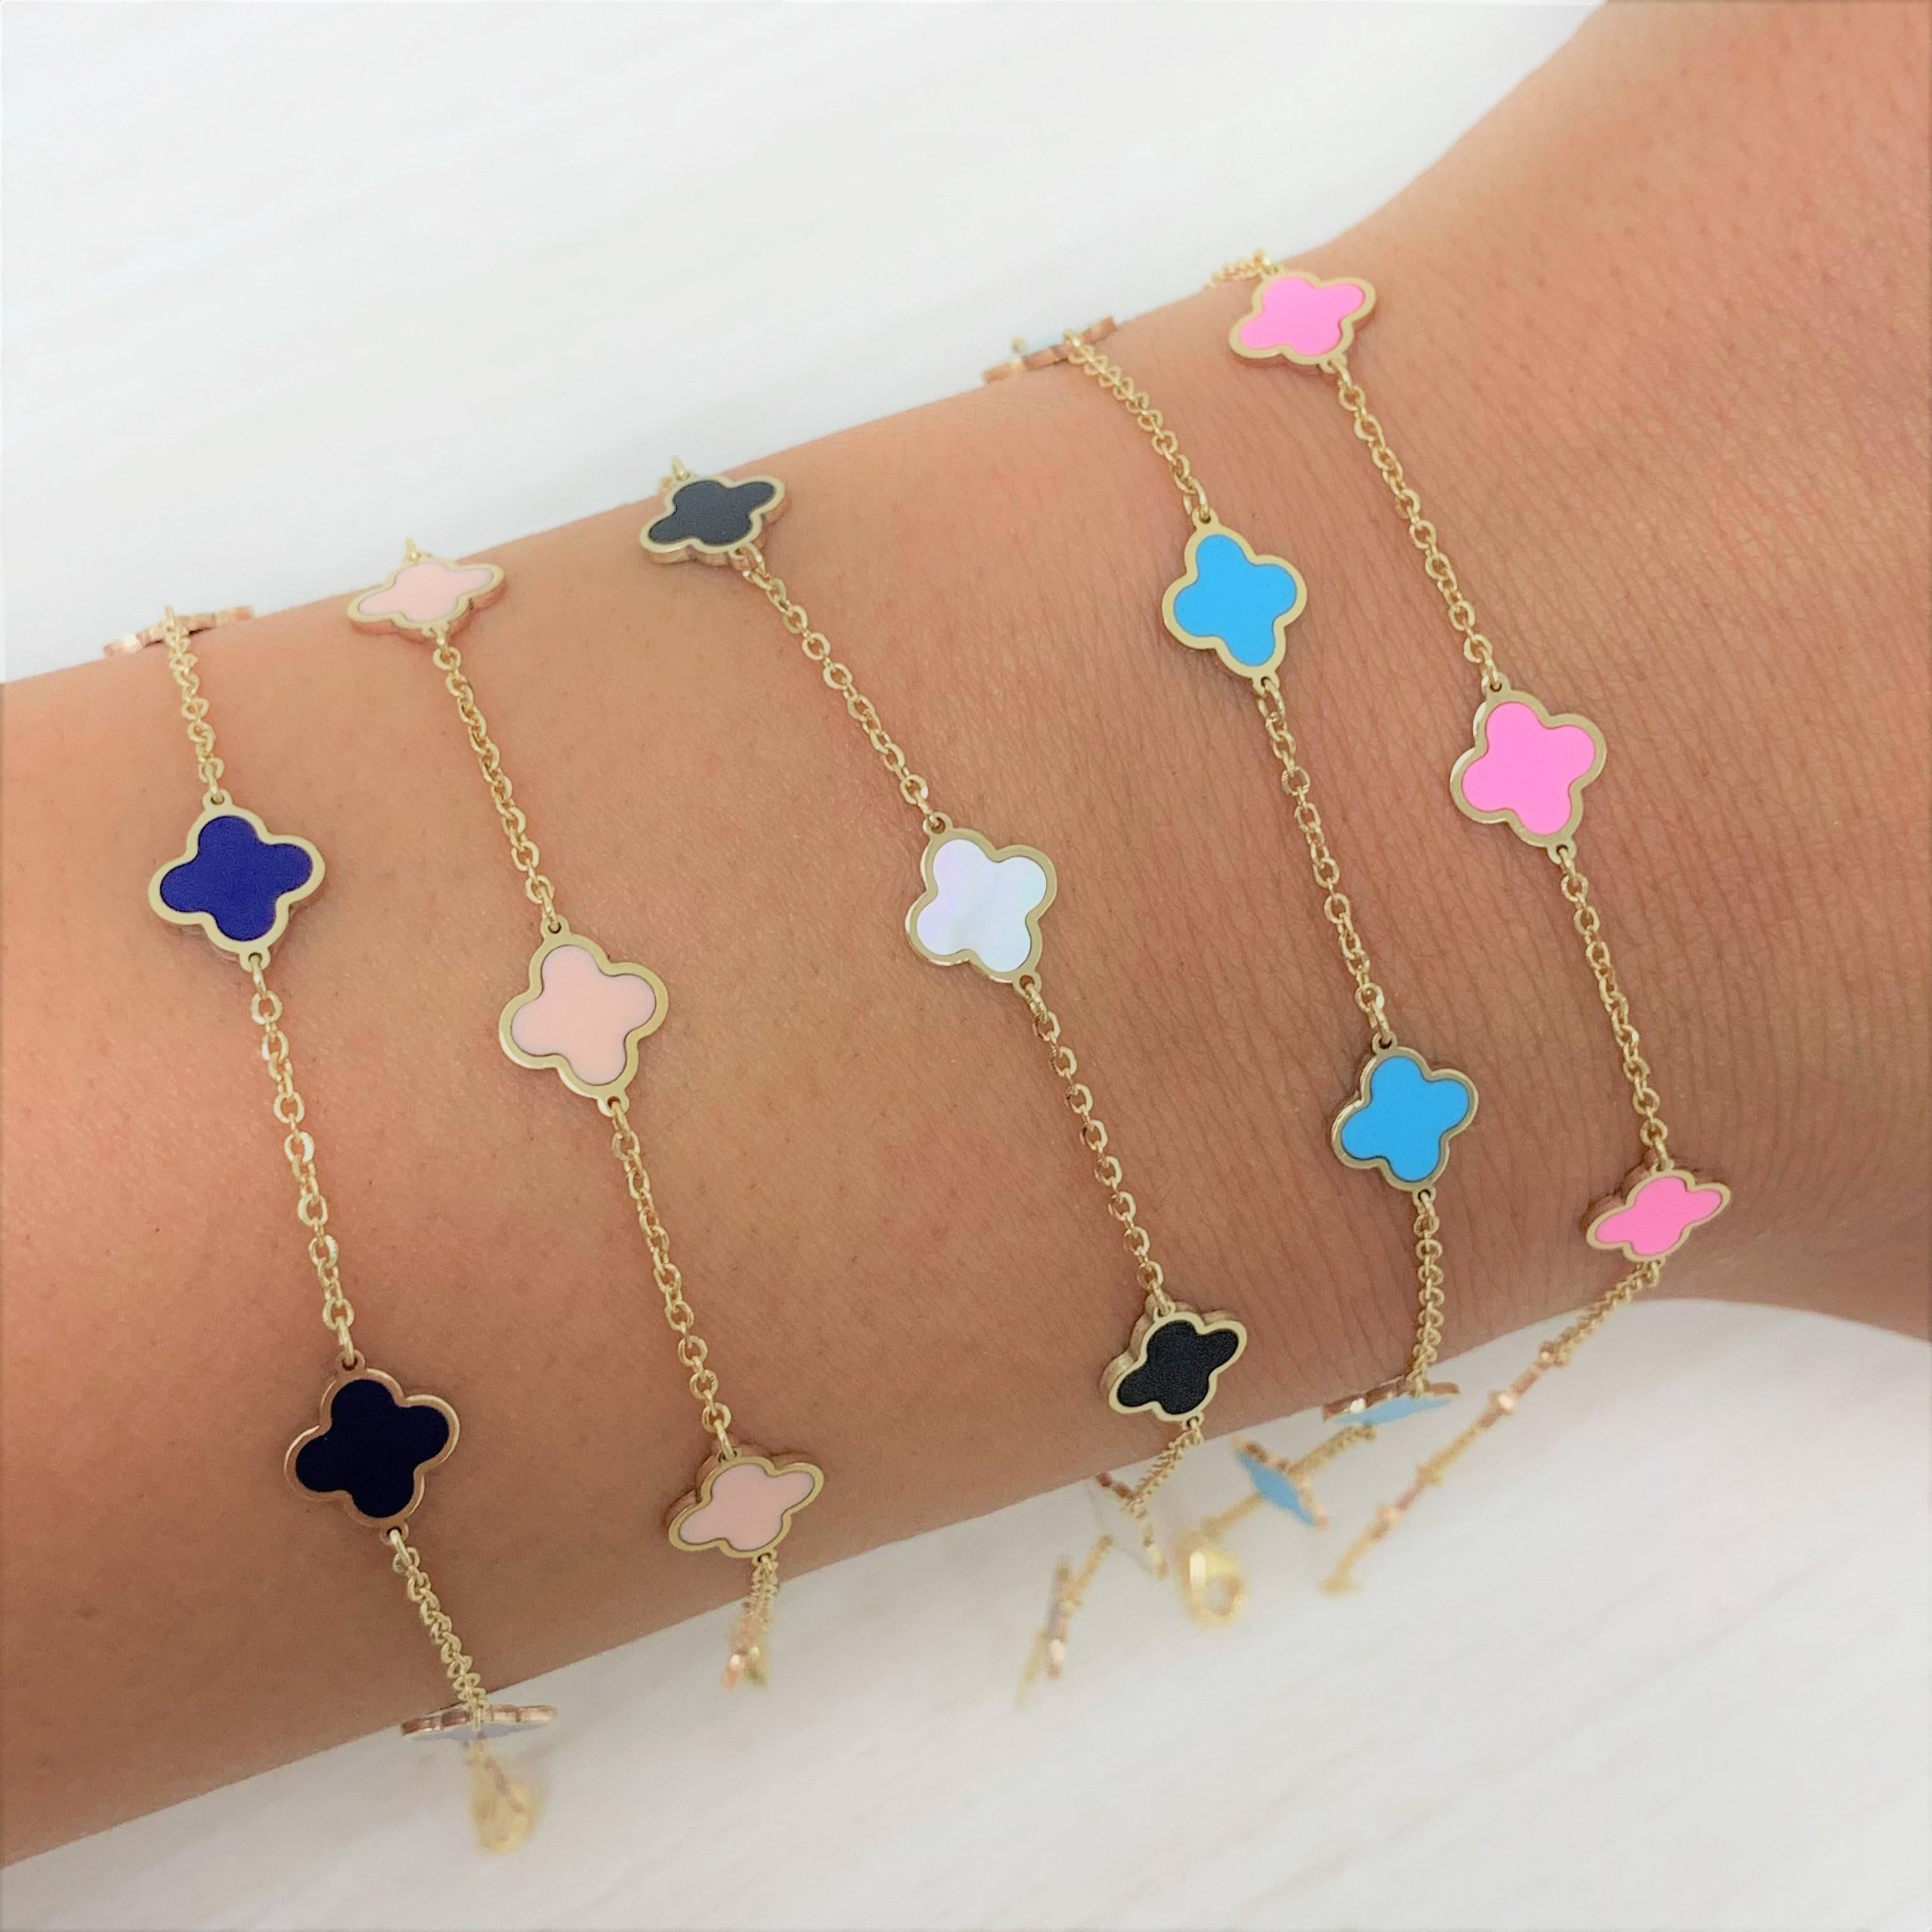 14K YELLOW GOLD STATION CLOVER BRACELET IN MOTHER OF PEARL

This piece is perfect for everyday wear and makes the perfect Gift! 

We certify that this is an authentic piece of Fine jewelry. Every piece is crafted with the utmost care and precision.